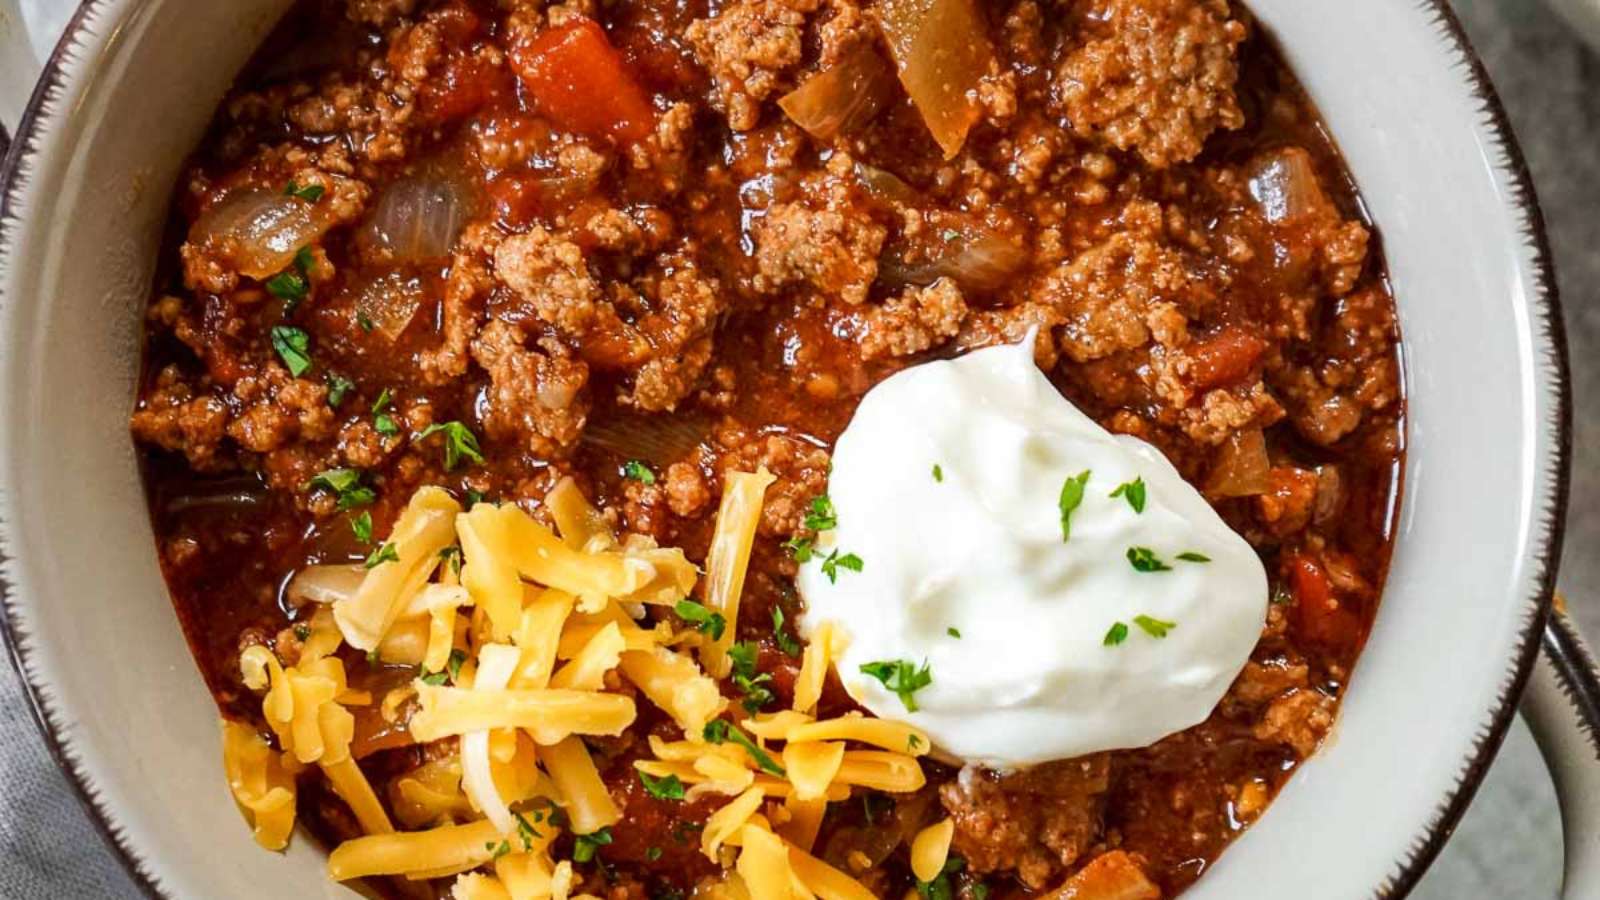 A bowl of chili with sour cream and cheese, made with Guinness beer.